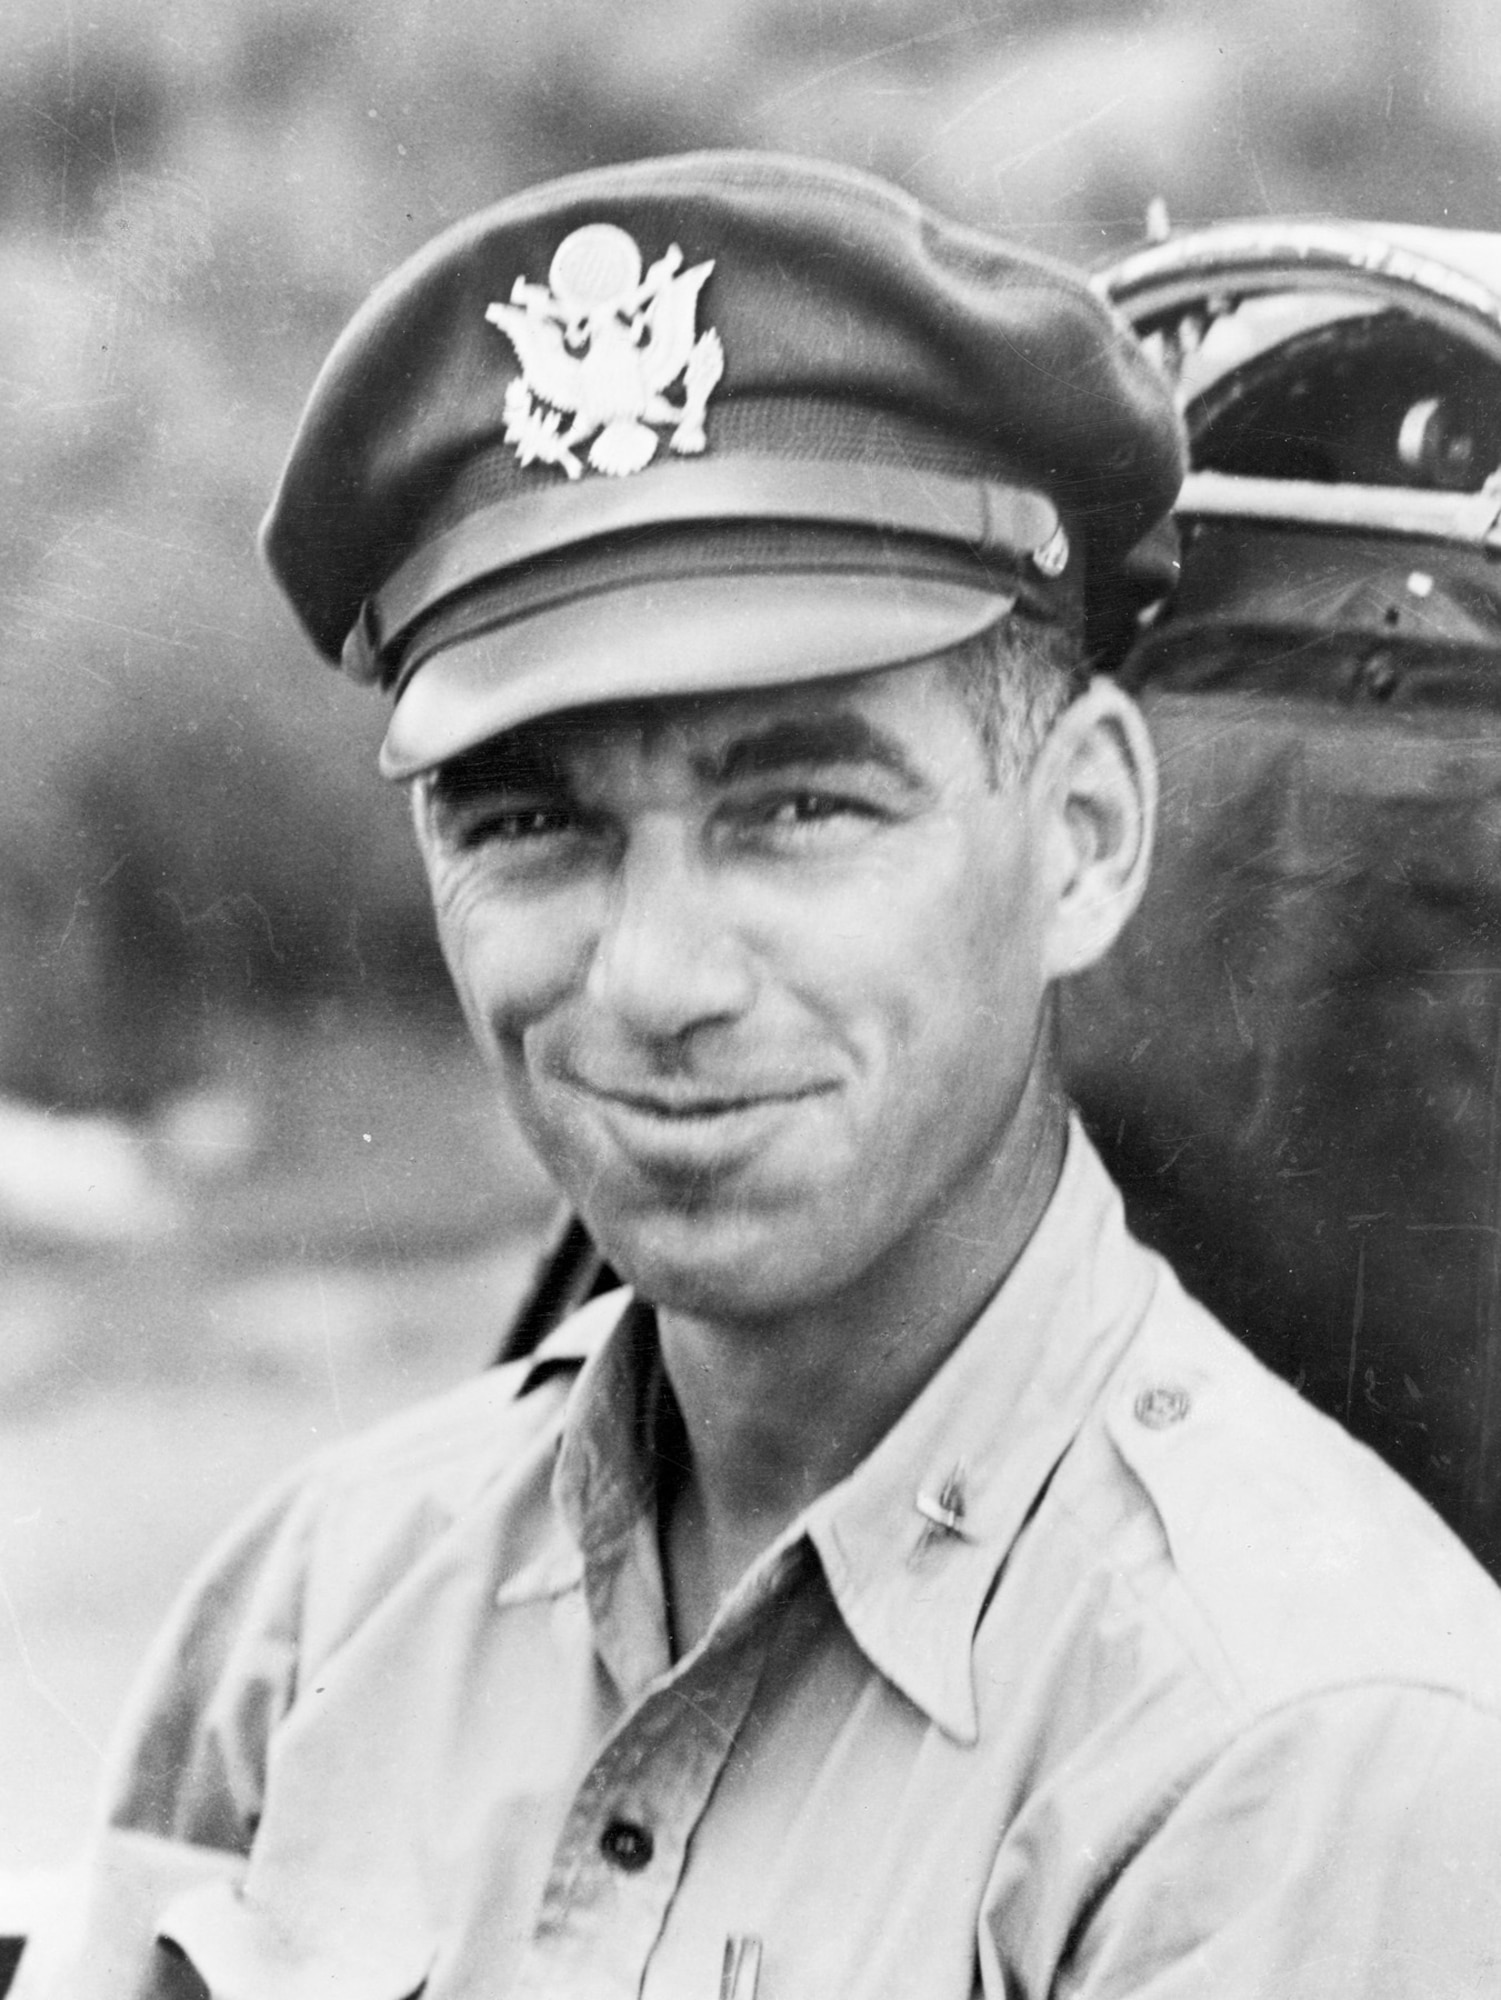 Medal of Honor recipient Col. Neel E. Kearby. (U.S. Air Force photo)